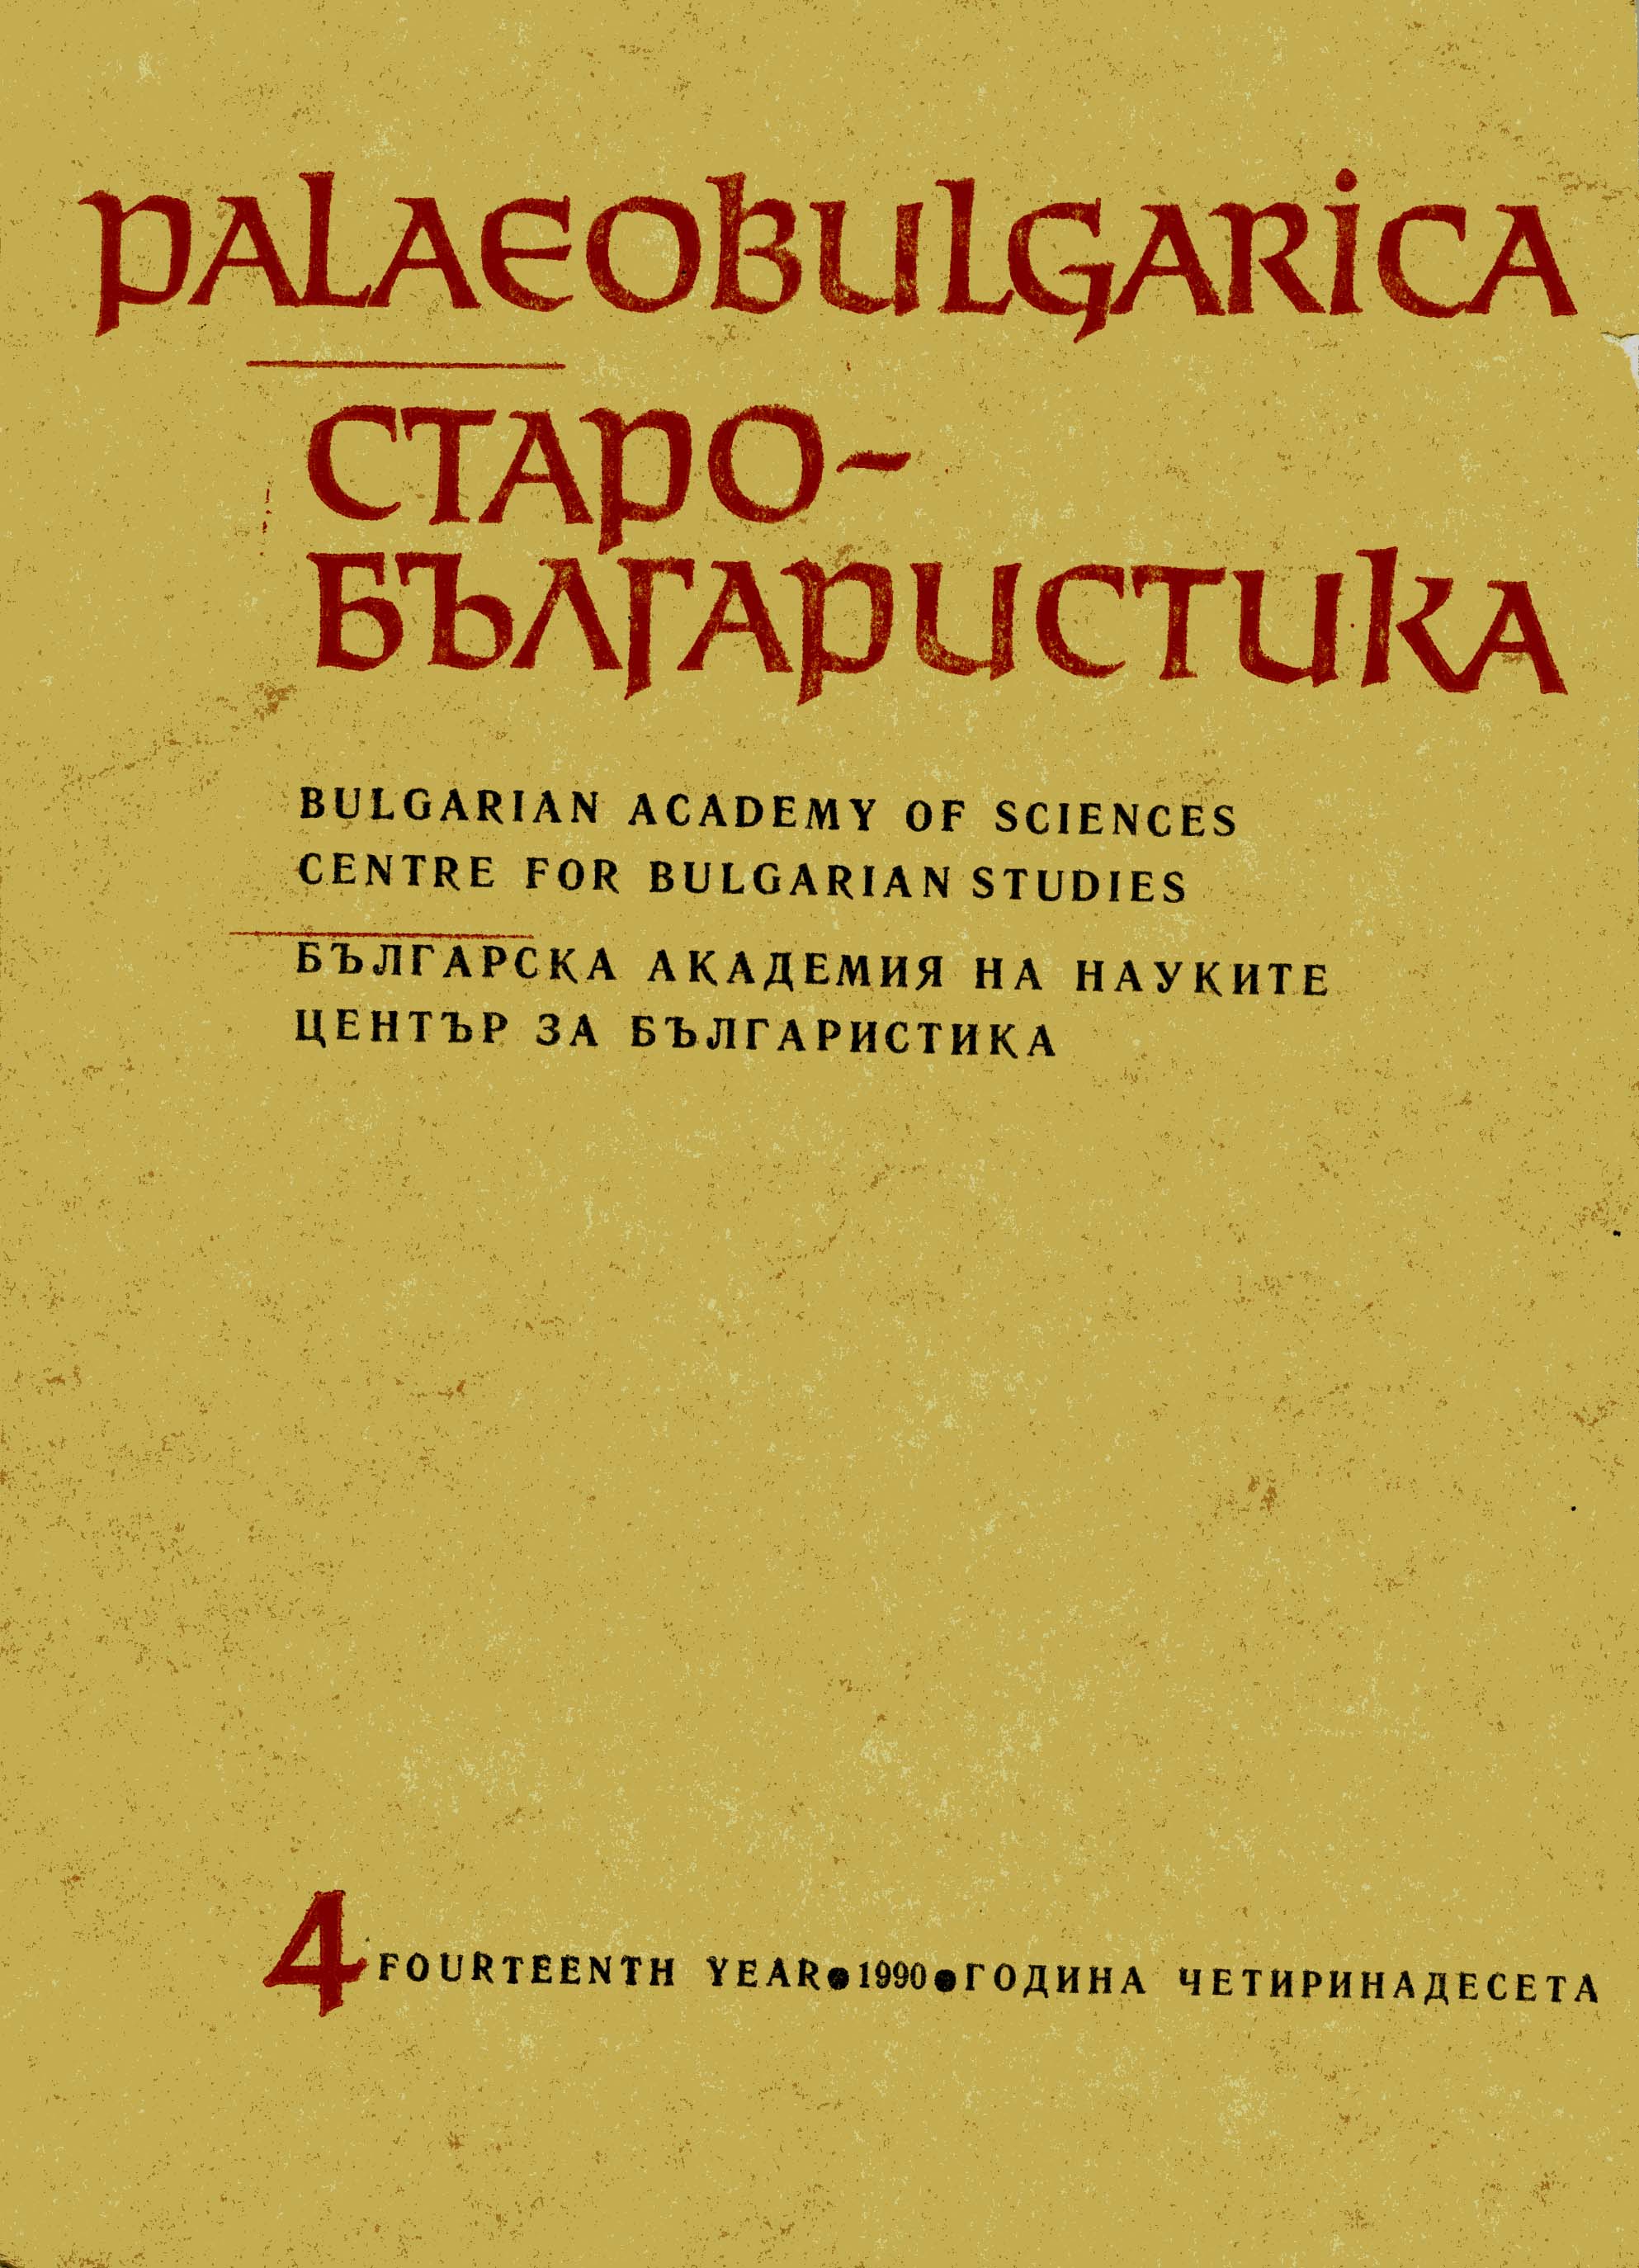 Portrait Images of Authors and Donators in the Old Bulgarian Book Cover Image